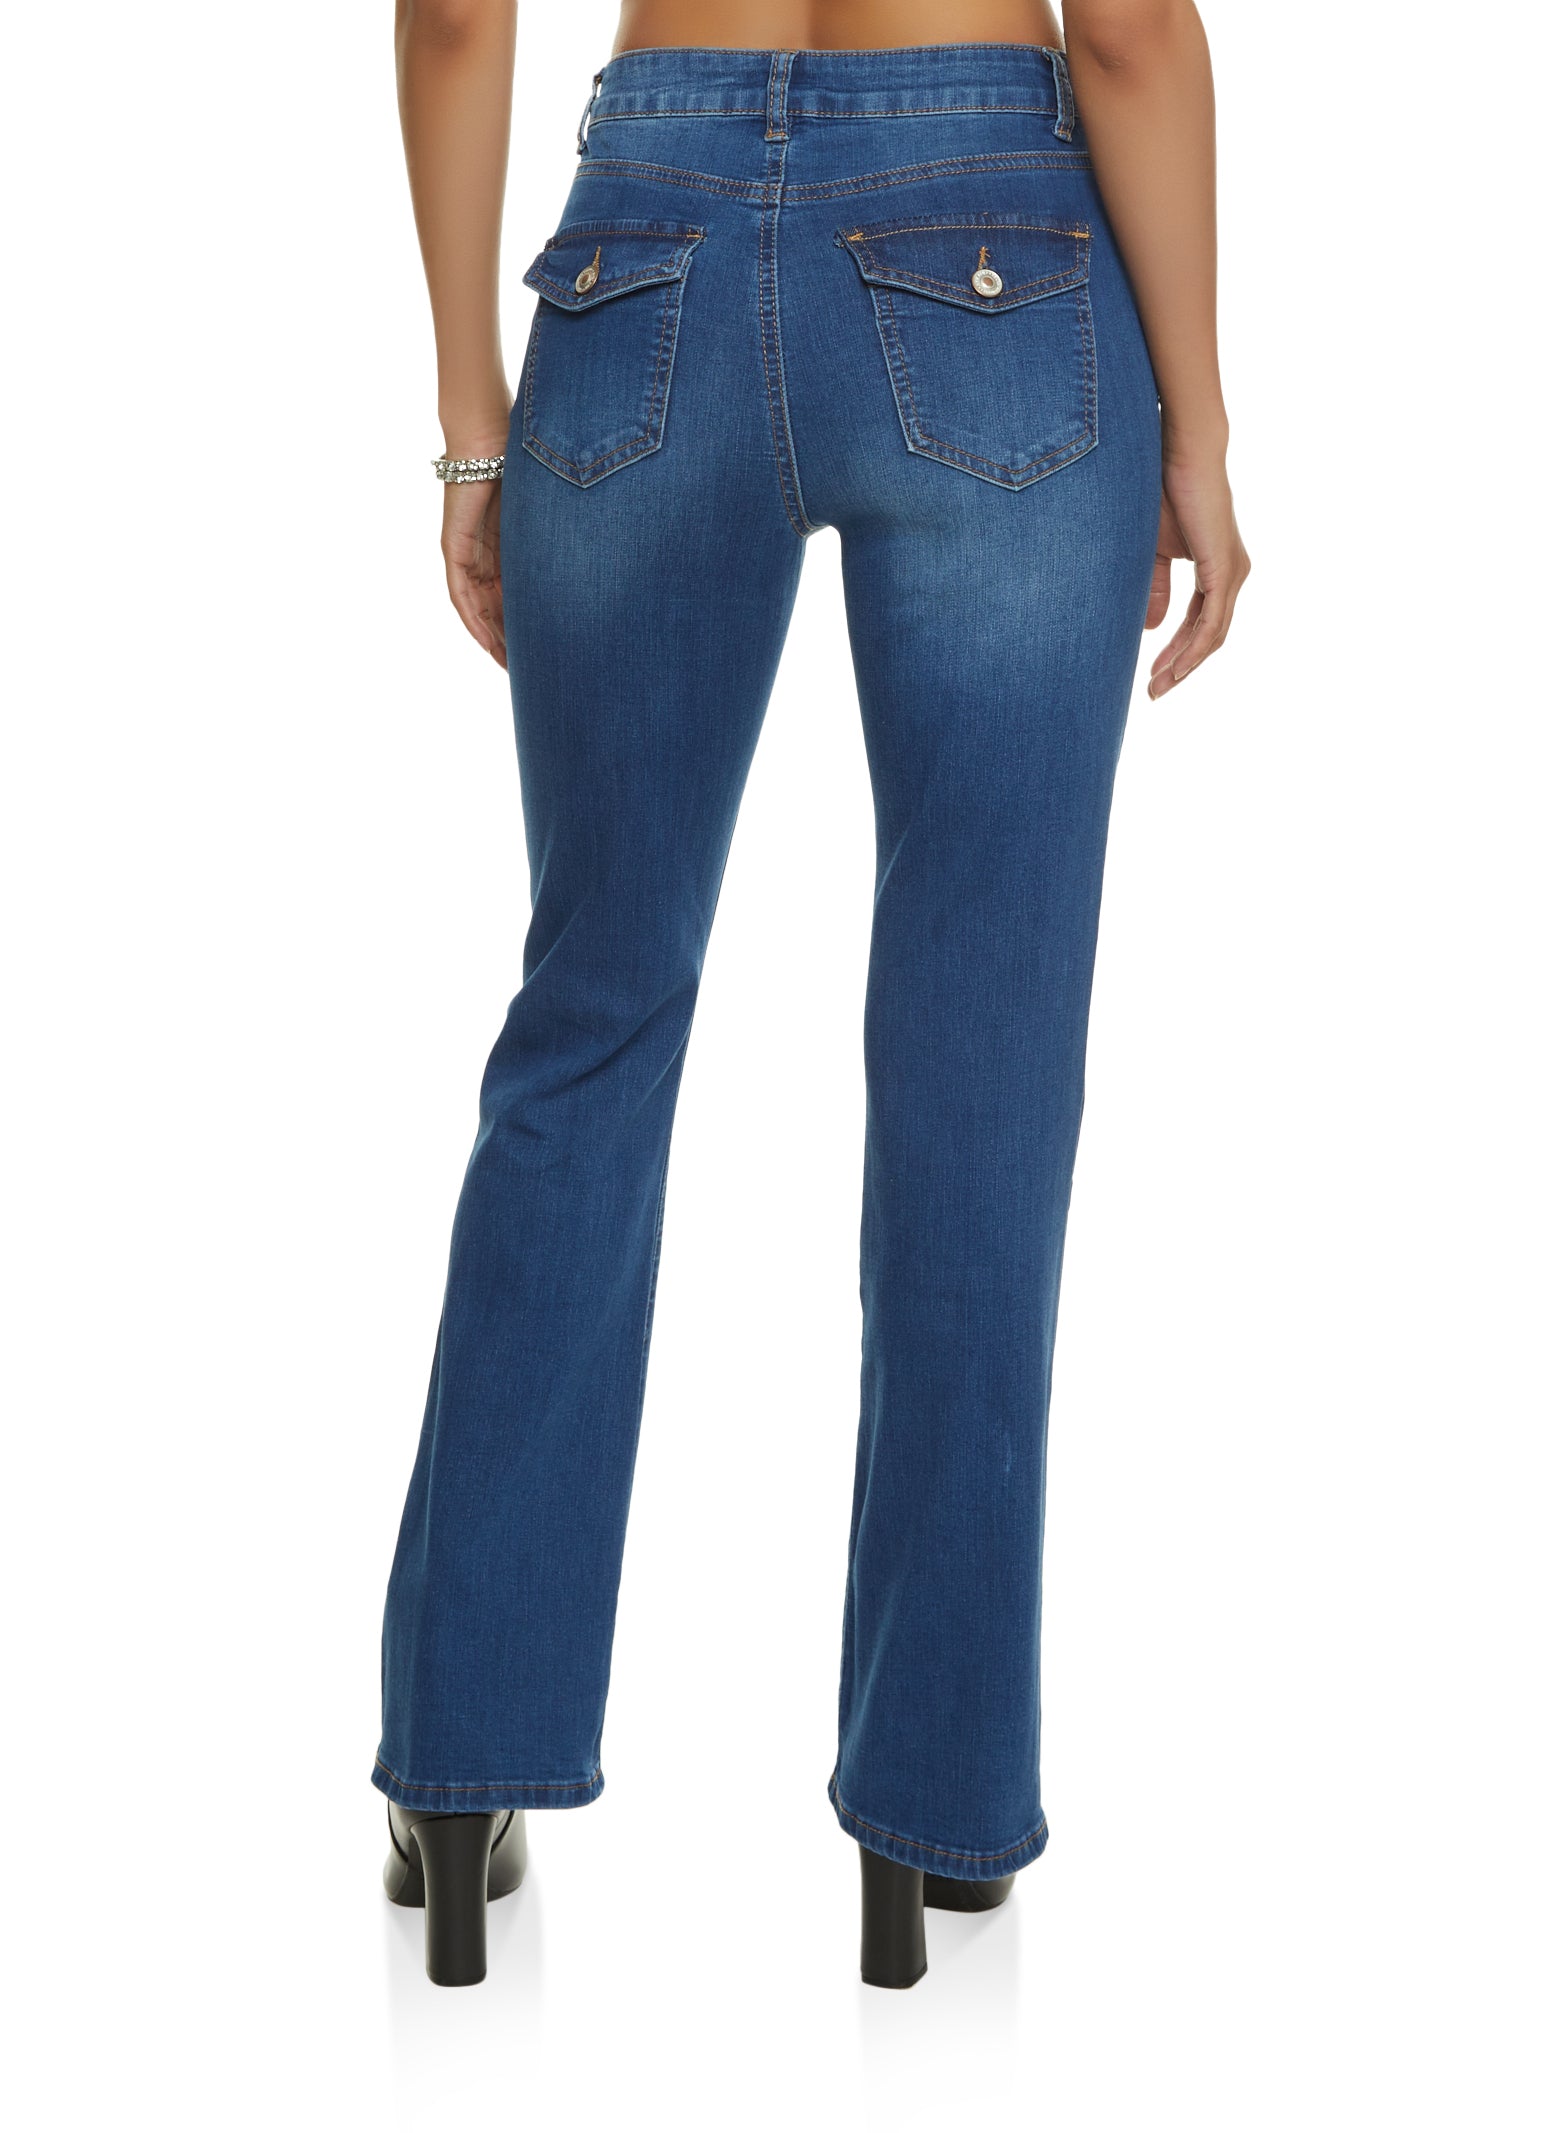 WAX Whiskered Boot Cut Jeans